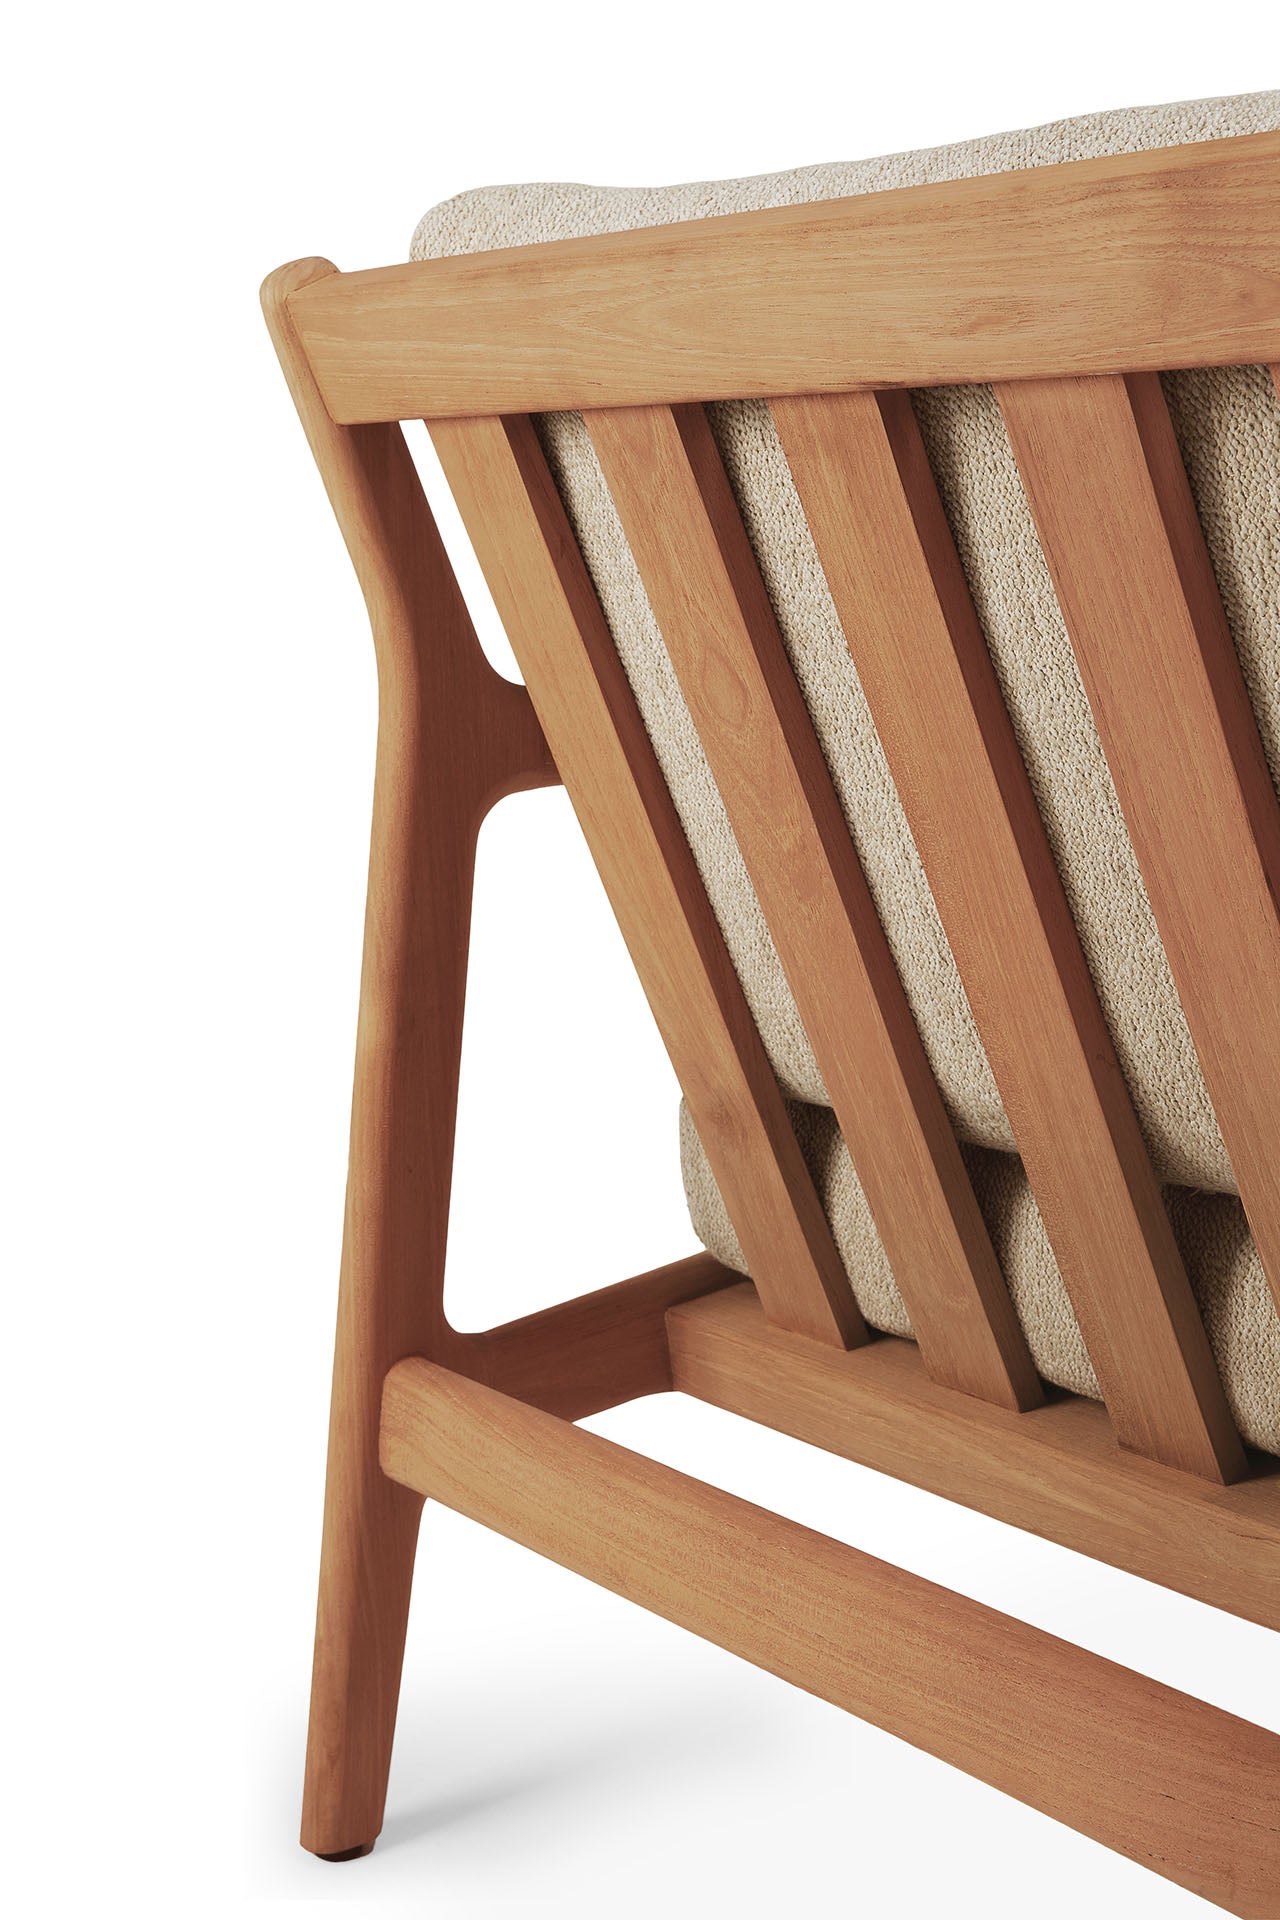 Jack Solid Teak Outdoor Lounge Chair, Natural Fabric